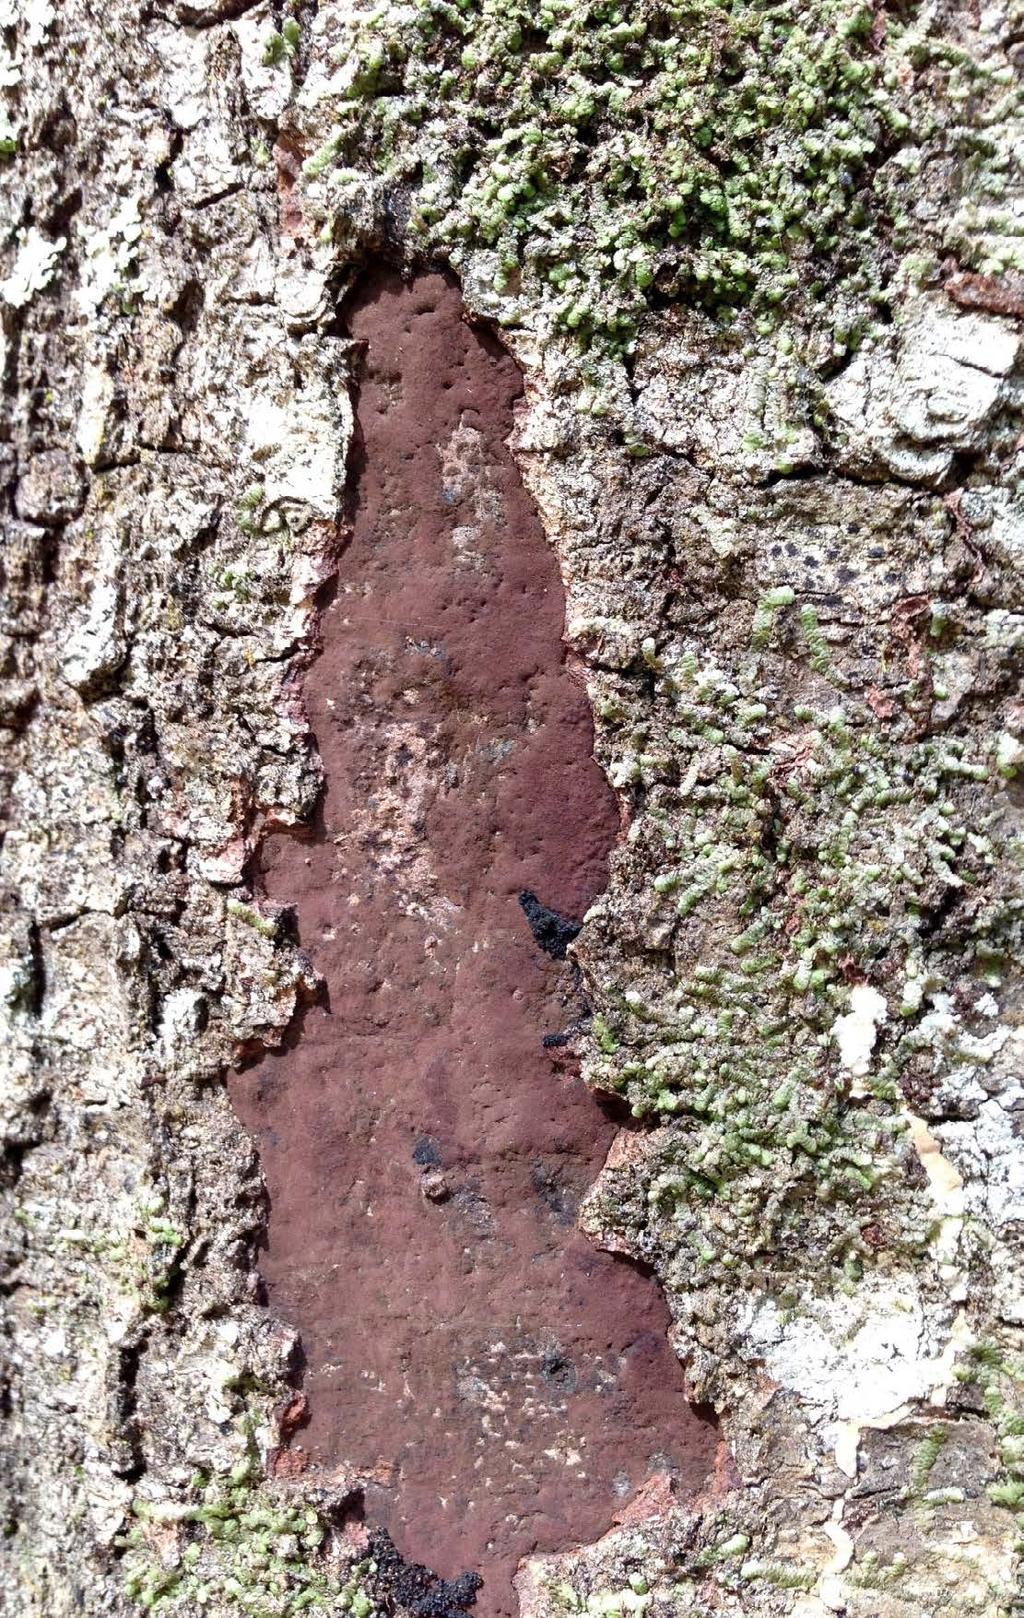 stress. Infected trees die soon after production of the stromatal mat in the cambium layer. Oaks in the red oak group are more susceptible than oaks in the white oak group.